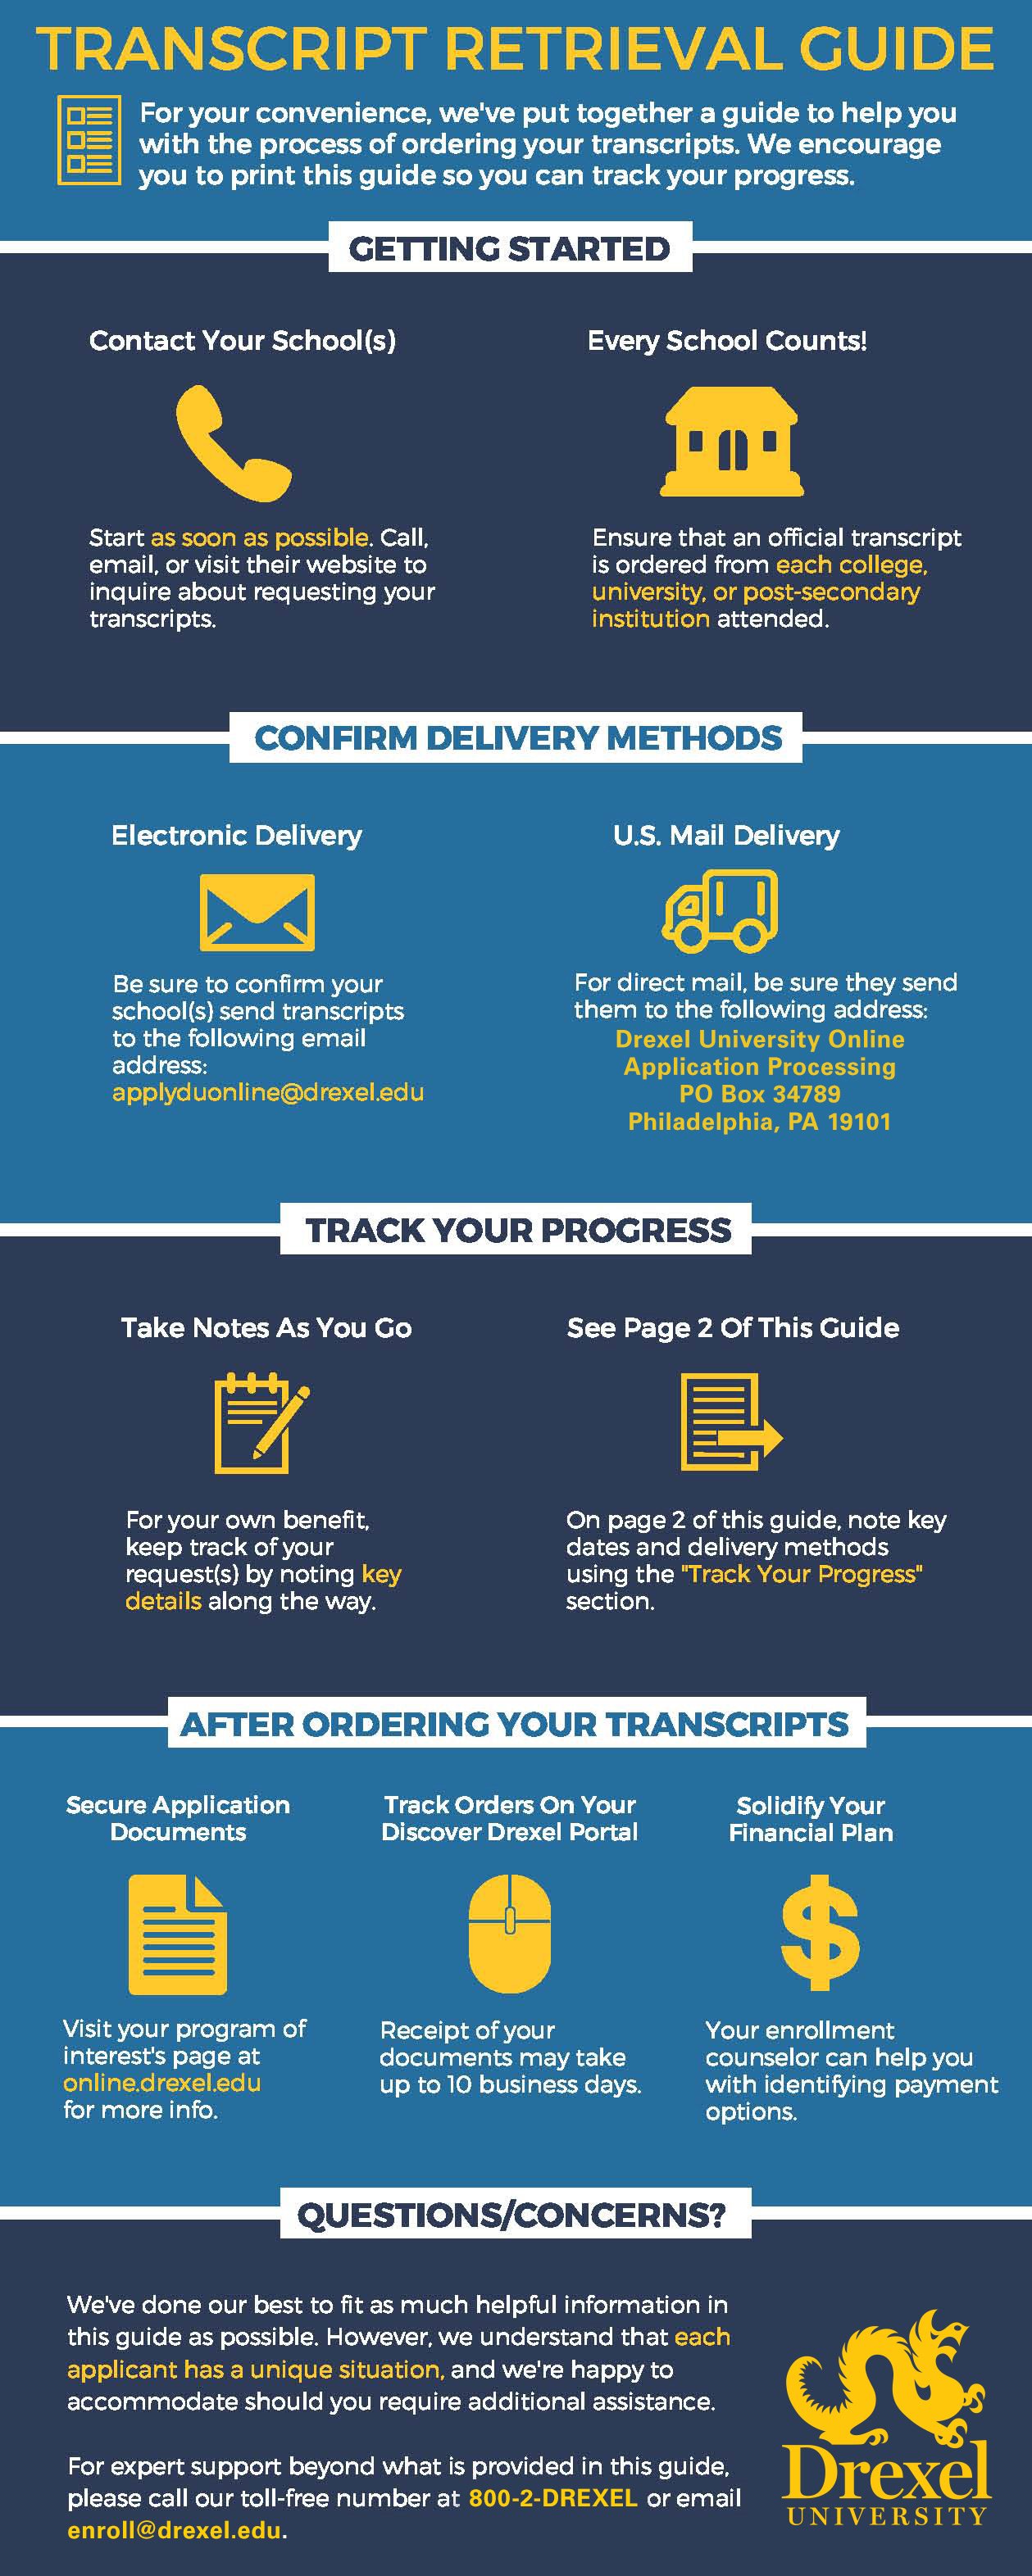 Infographic helping prospective online students requesting transcripts. Created by Drexel University Online.